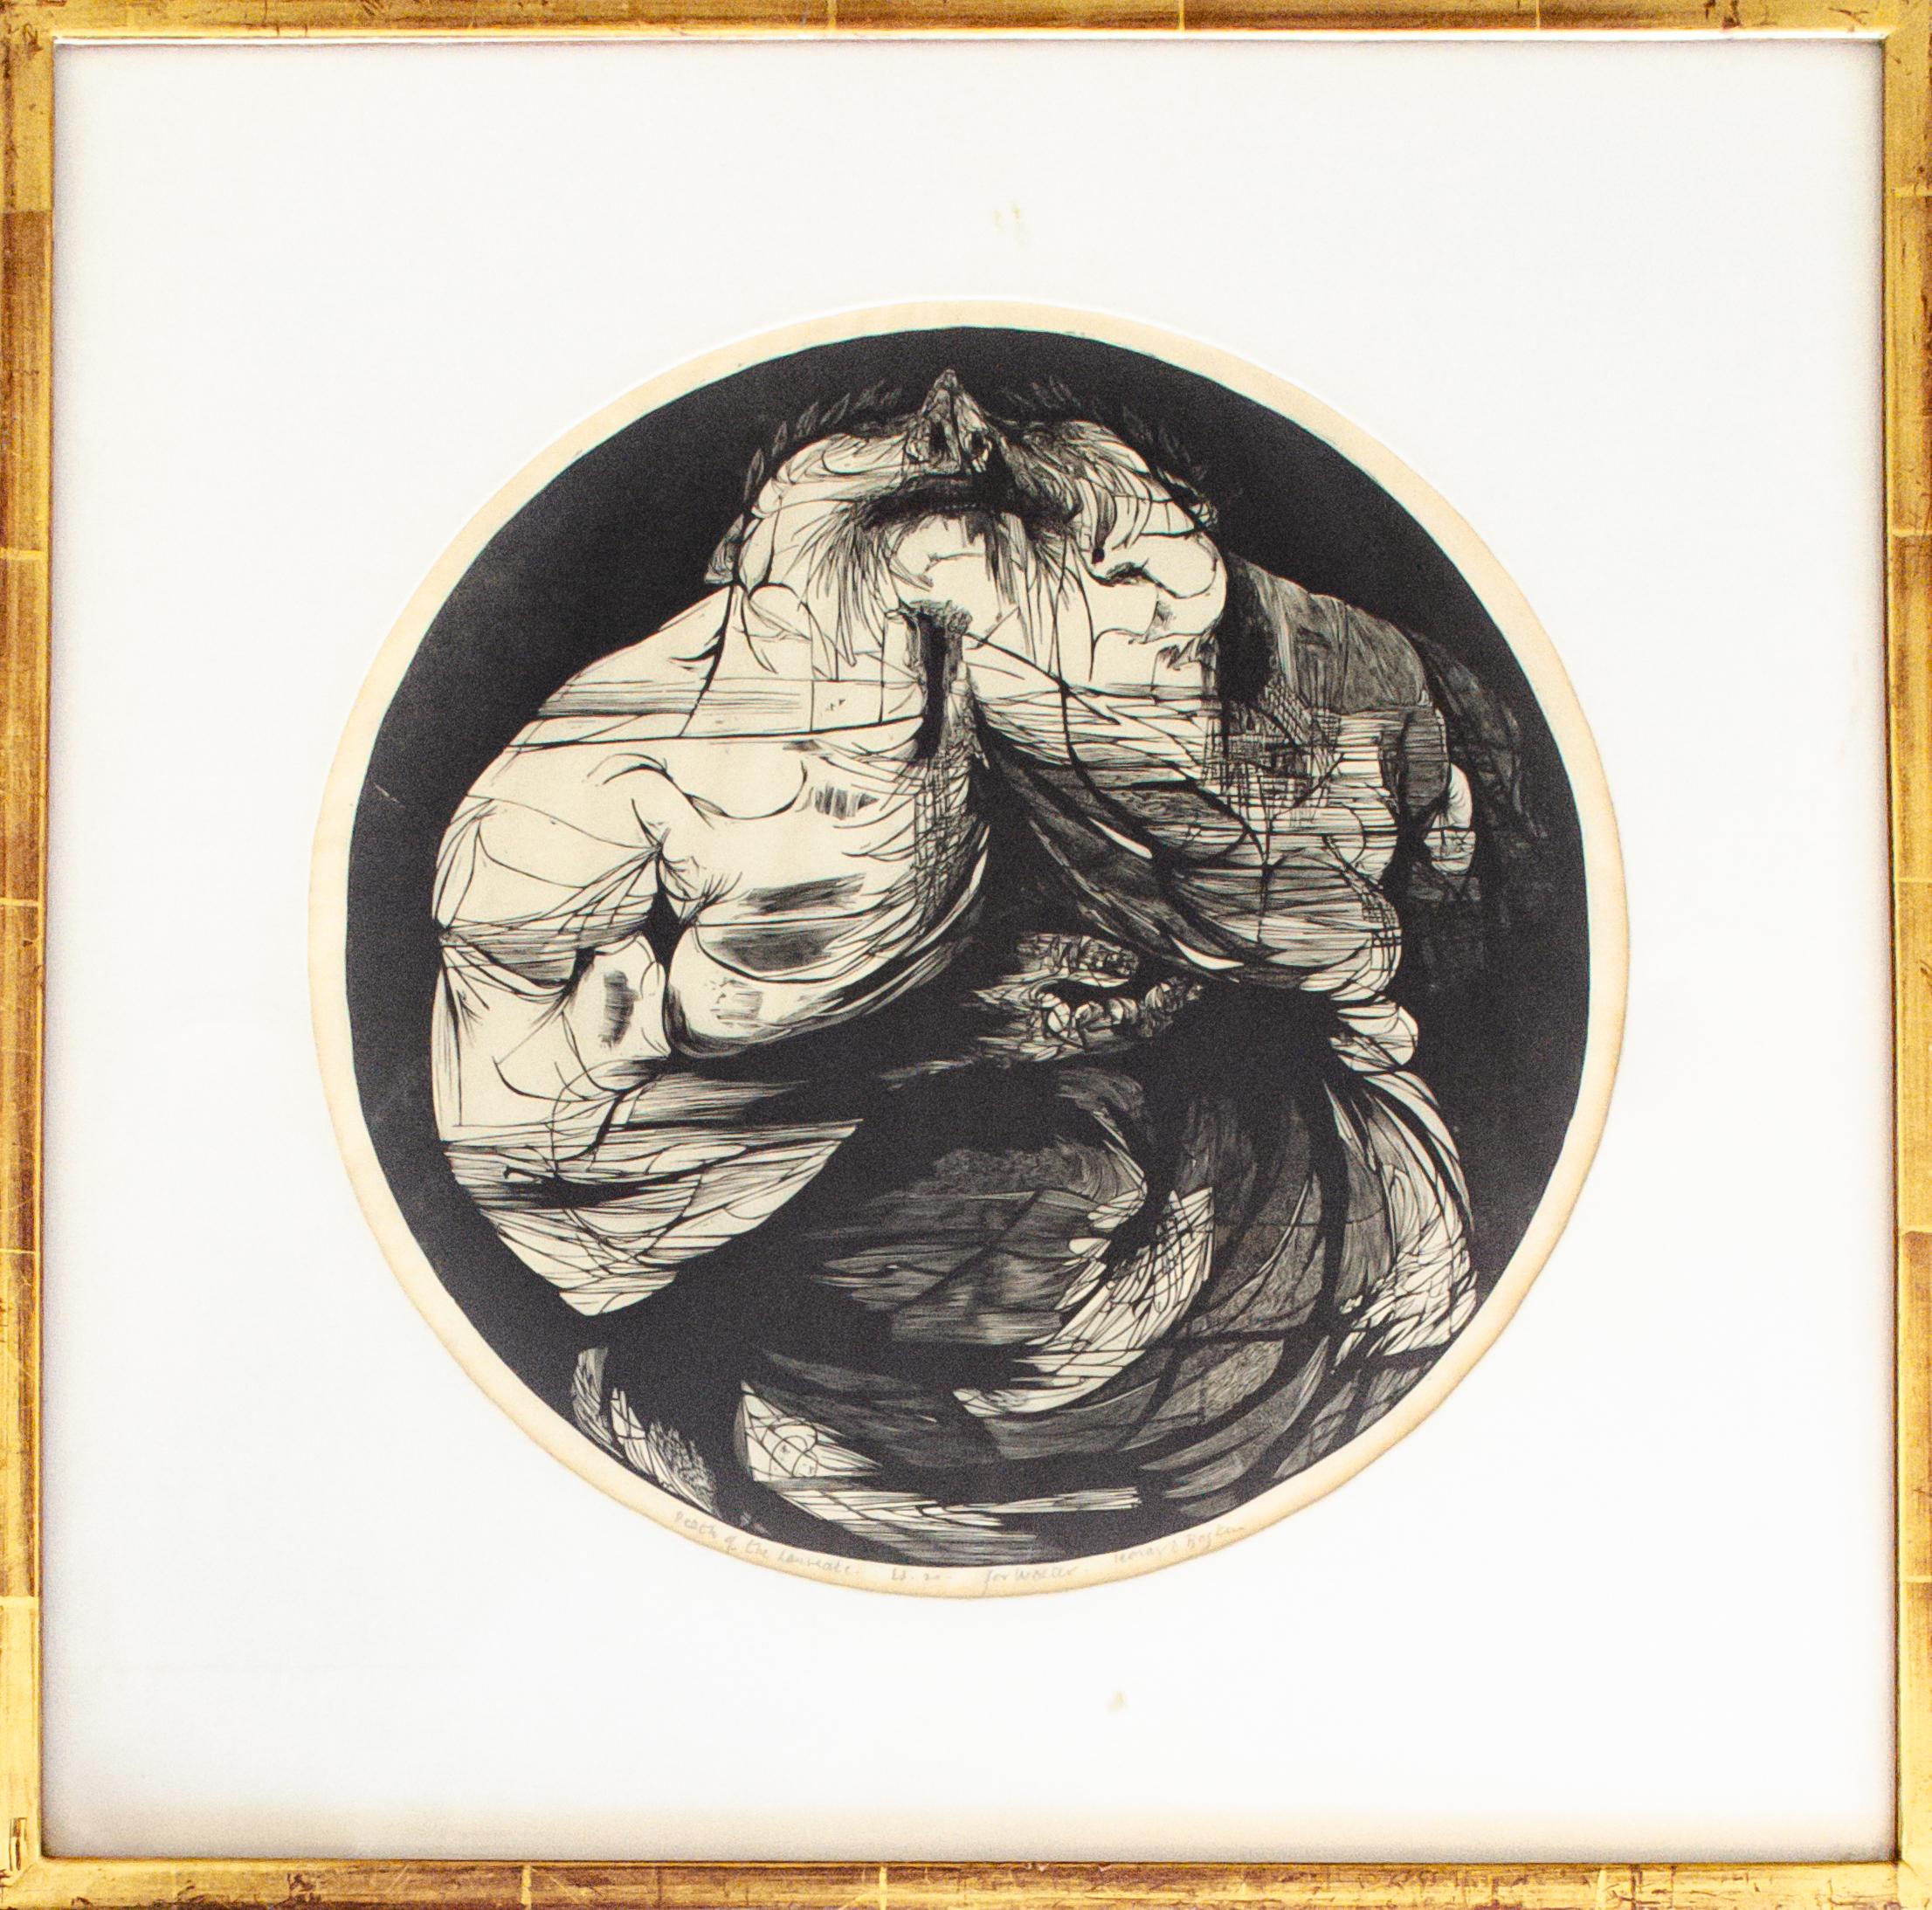 Leonard Baskin (1922-2000)
Death of the Laureate, `1957
Wood Engraving
Framed: 18 1/2 x 18 in.
Signed and inscribed bottom: Death of the Laureate, Ed. 20, For Walter [Rosenblum], Leonard Baskin

A highly respected draftsman, printmaker, teacher, and